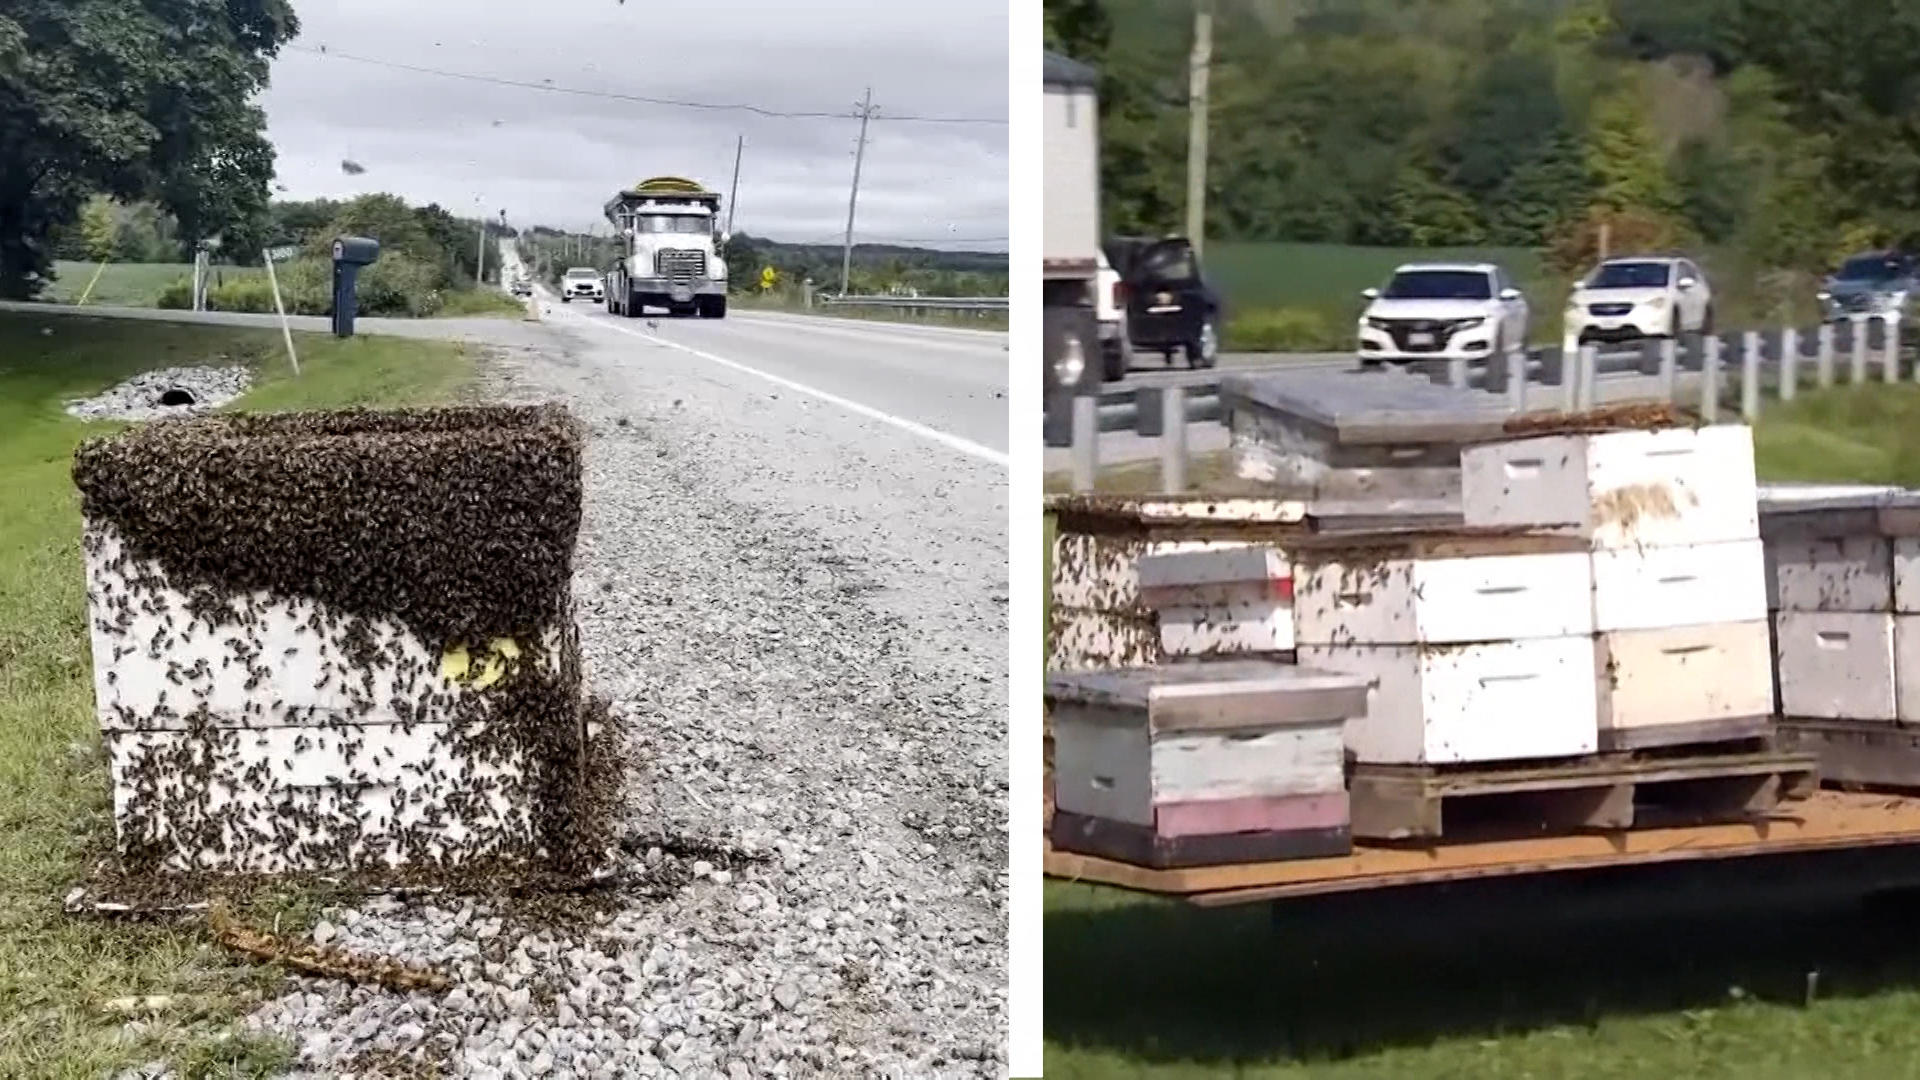 Driver must keep windows closed Five million bees are on the highway